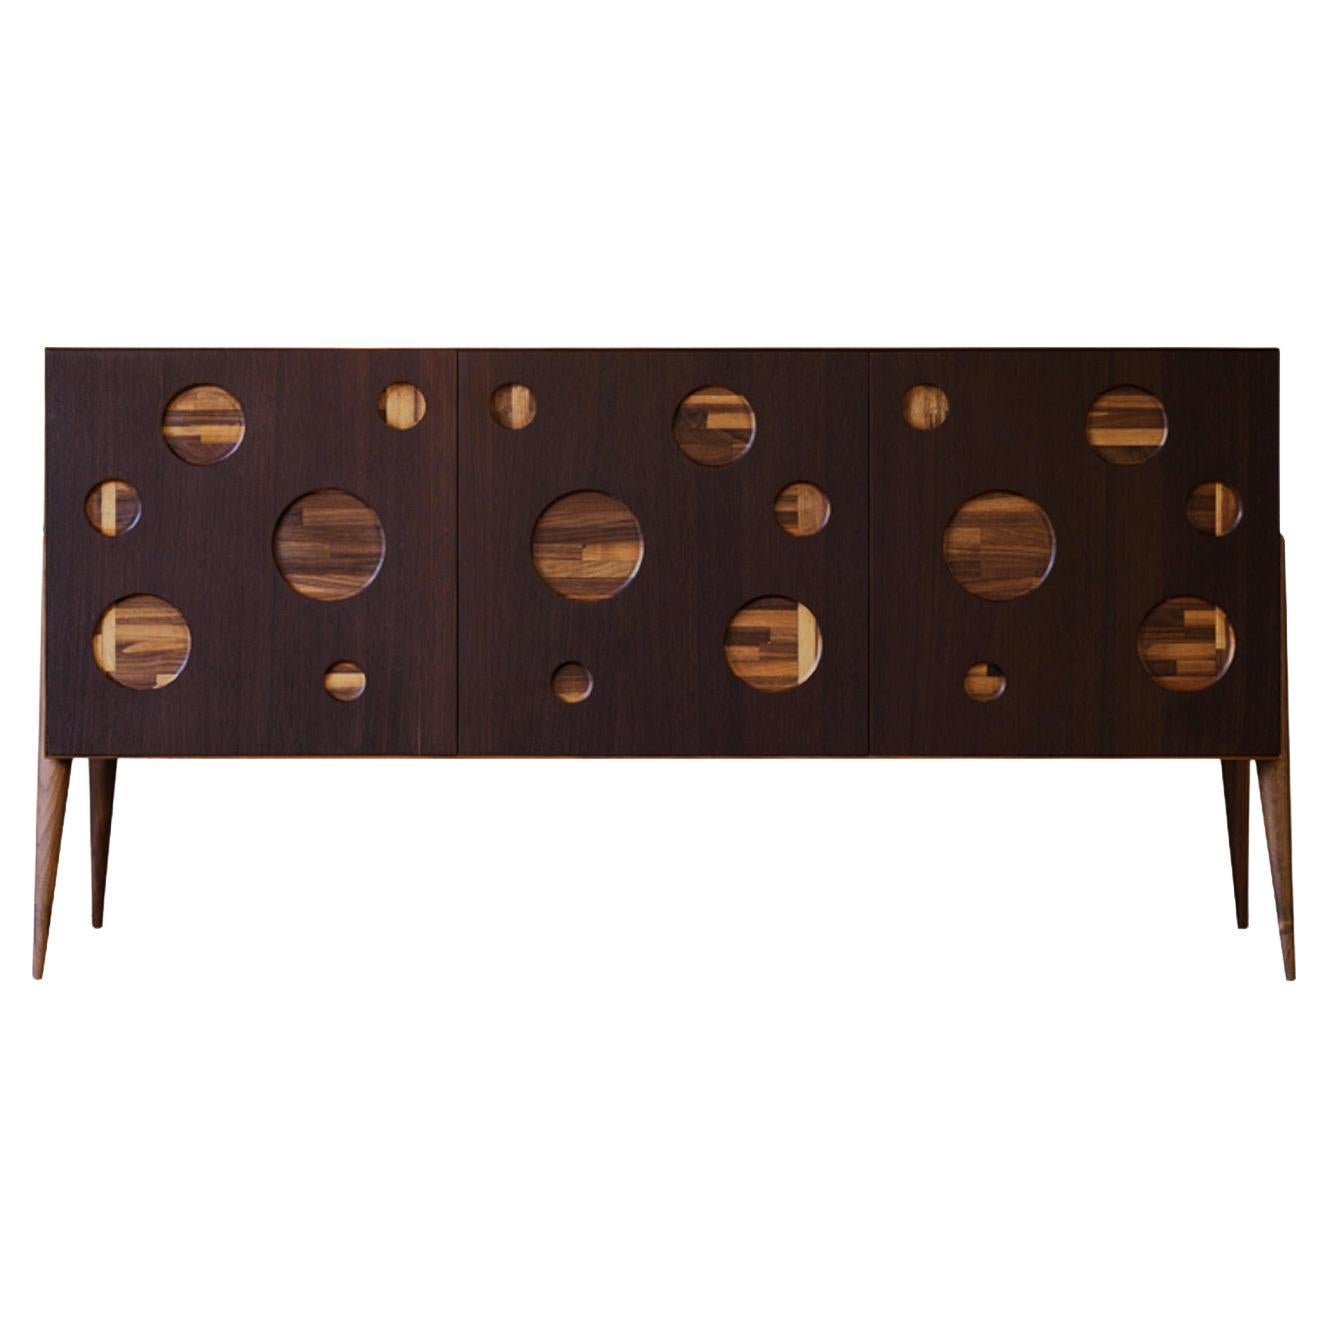 Lauta Cerchio Solid Wood Sideboard, Walnut in Natural Finish, Contemporary